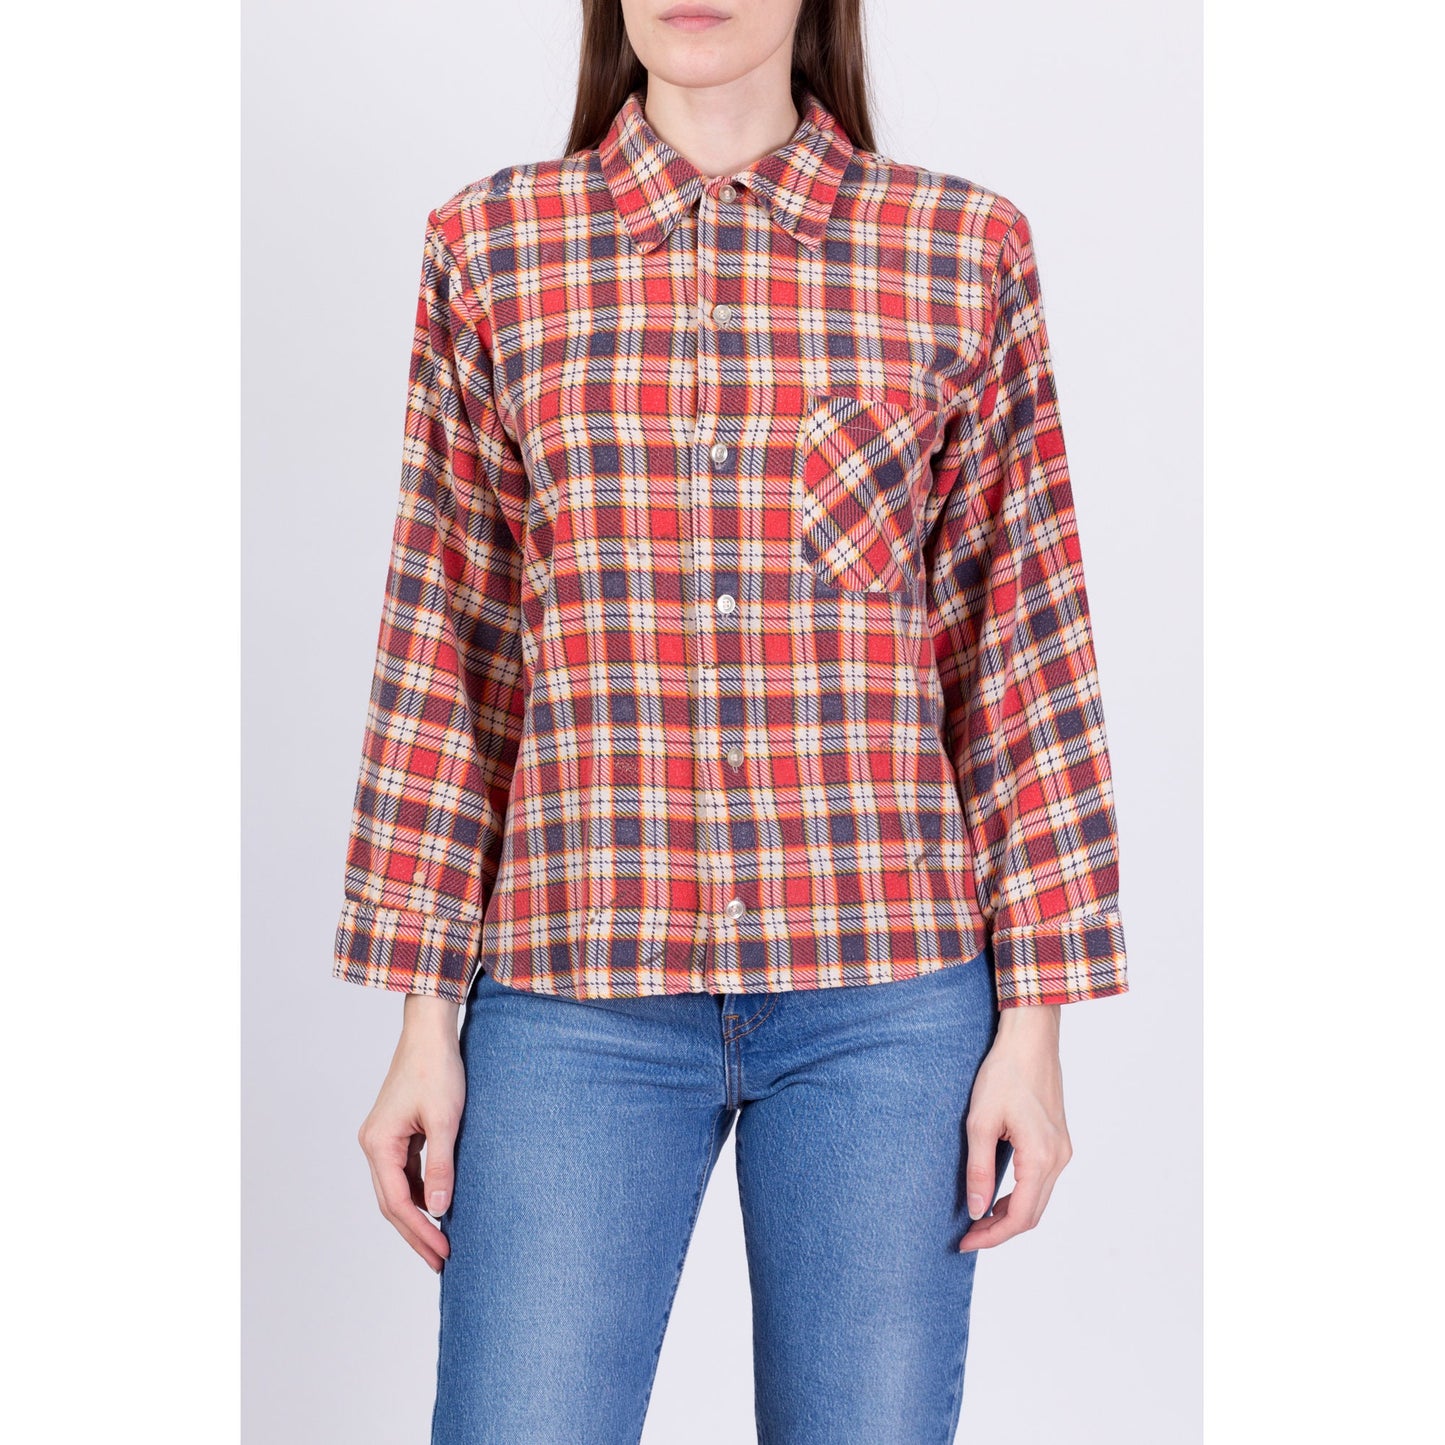 80s Plaid Flannel Button Up Shirt - Small 